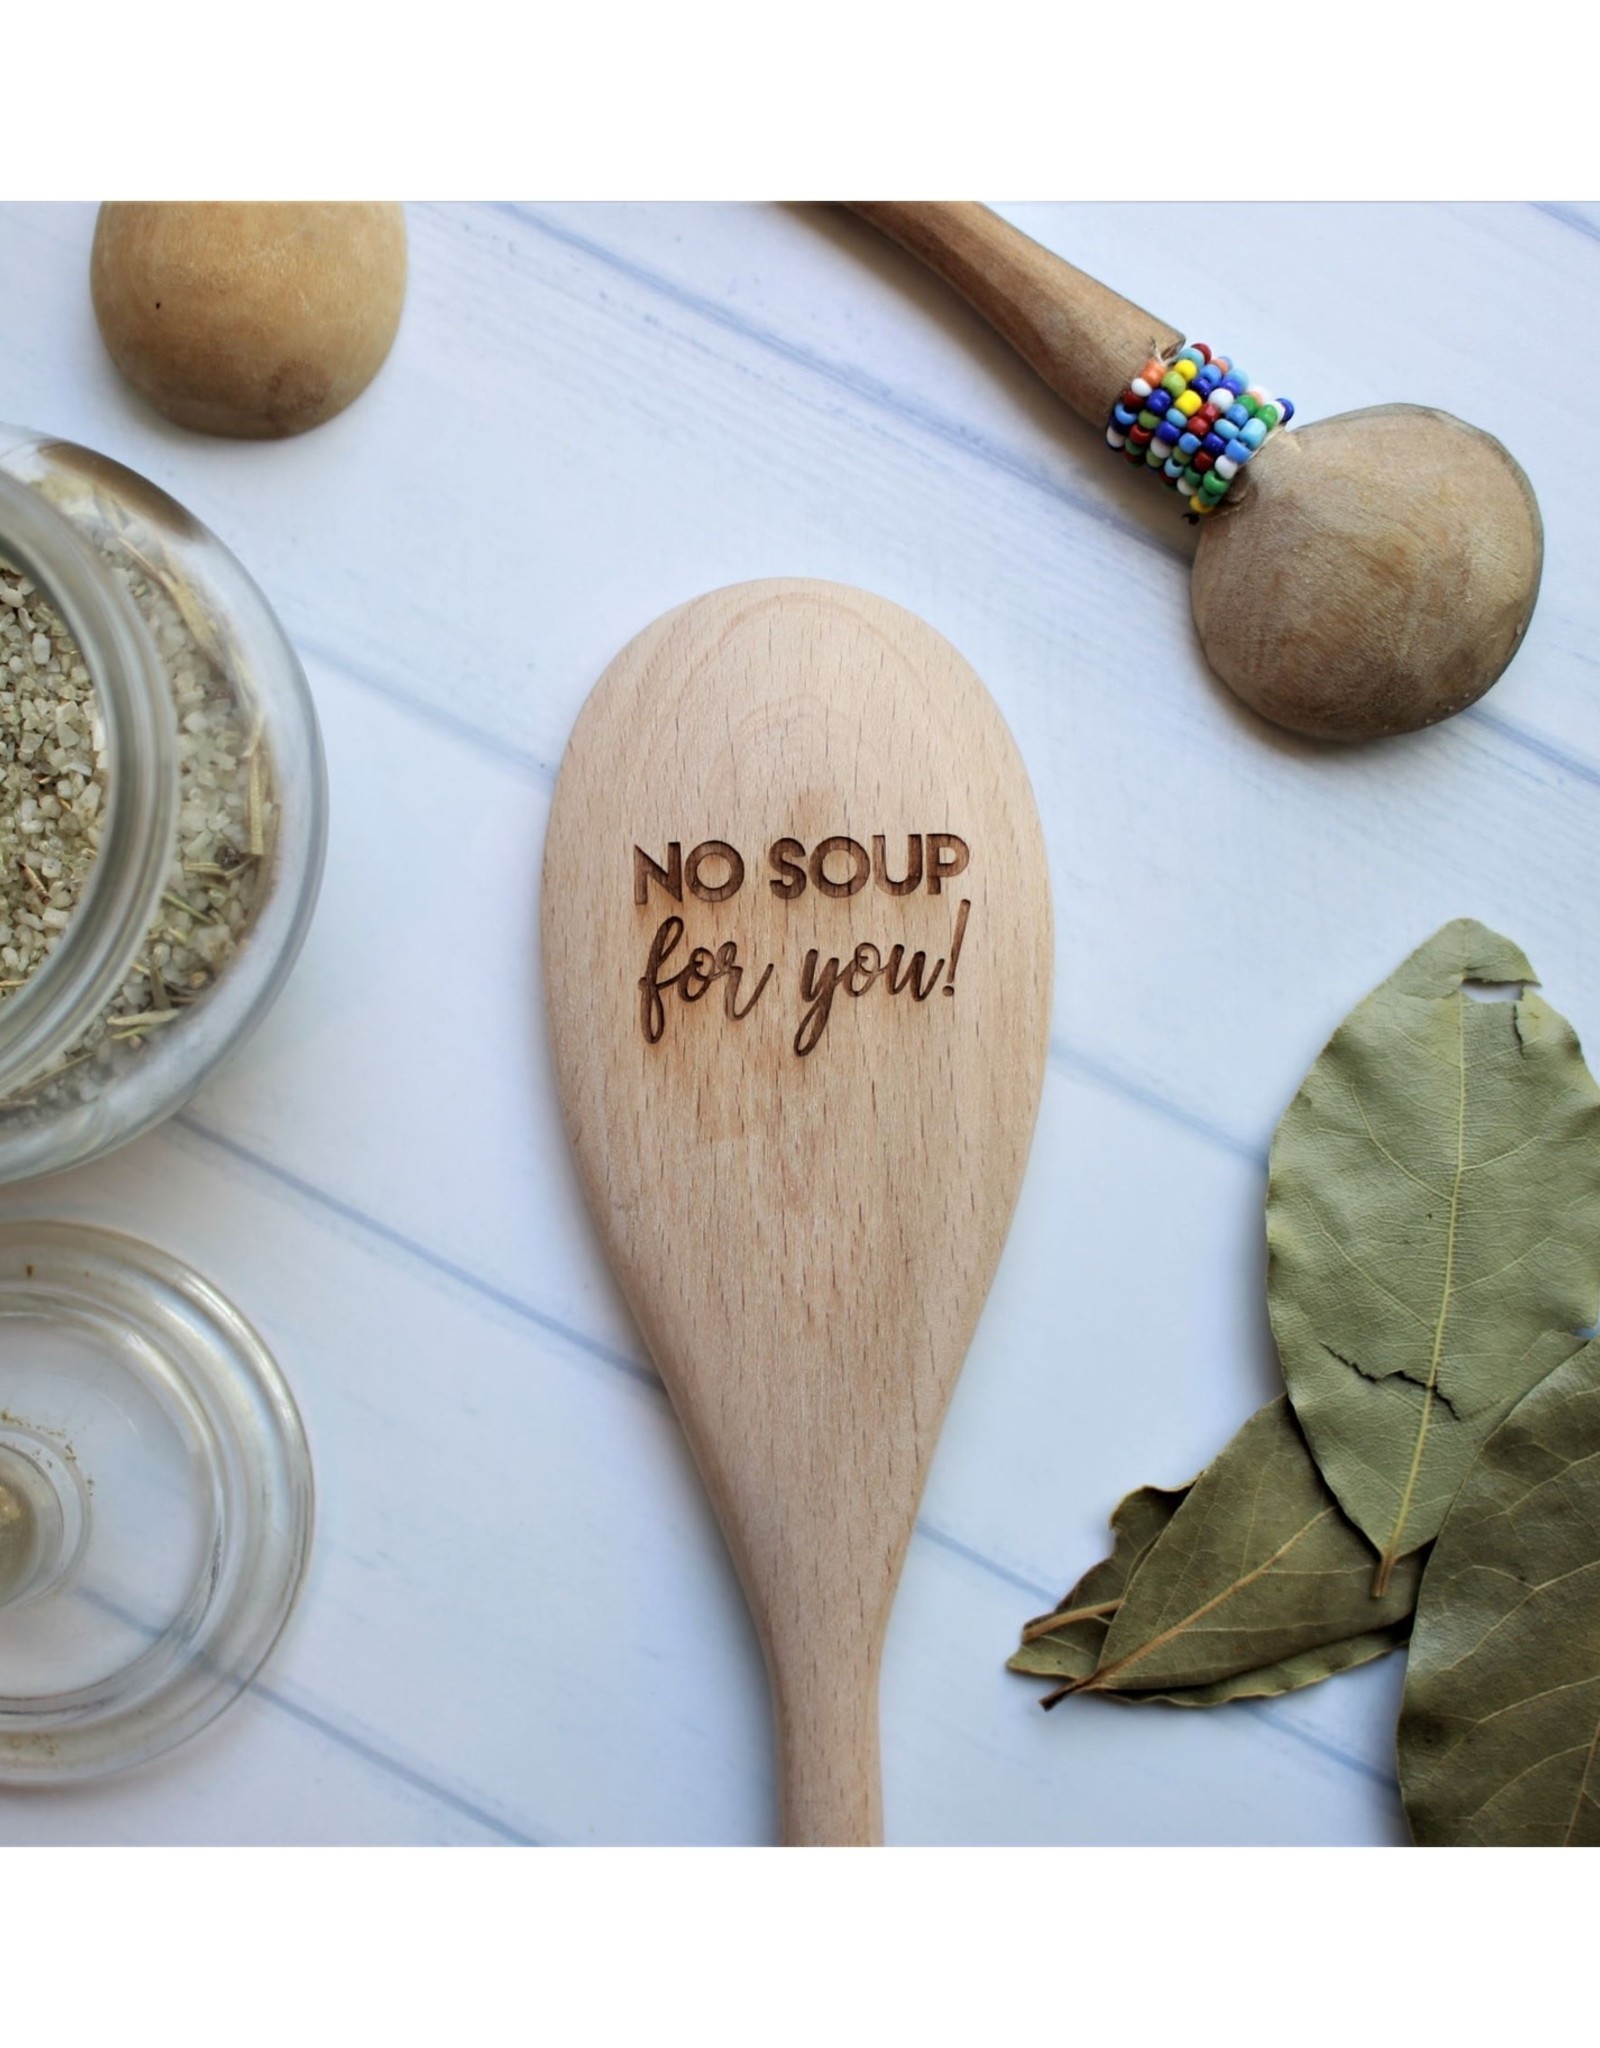 North To South Wooden Spoon | No Soup For You!